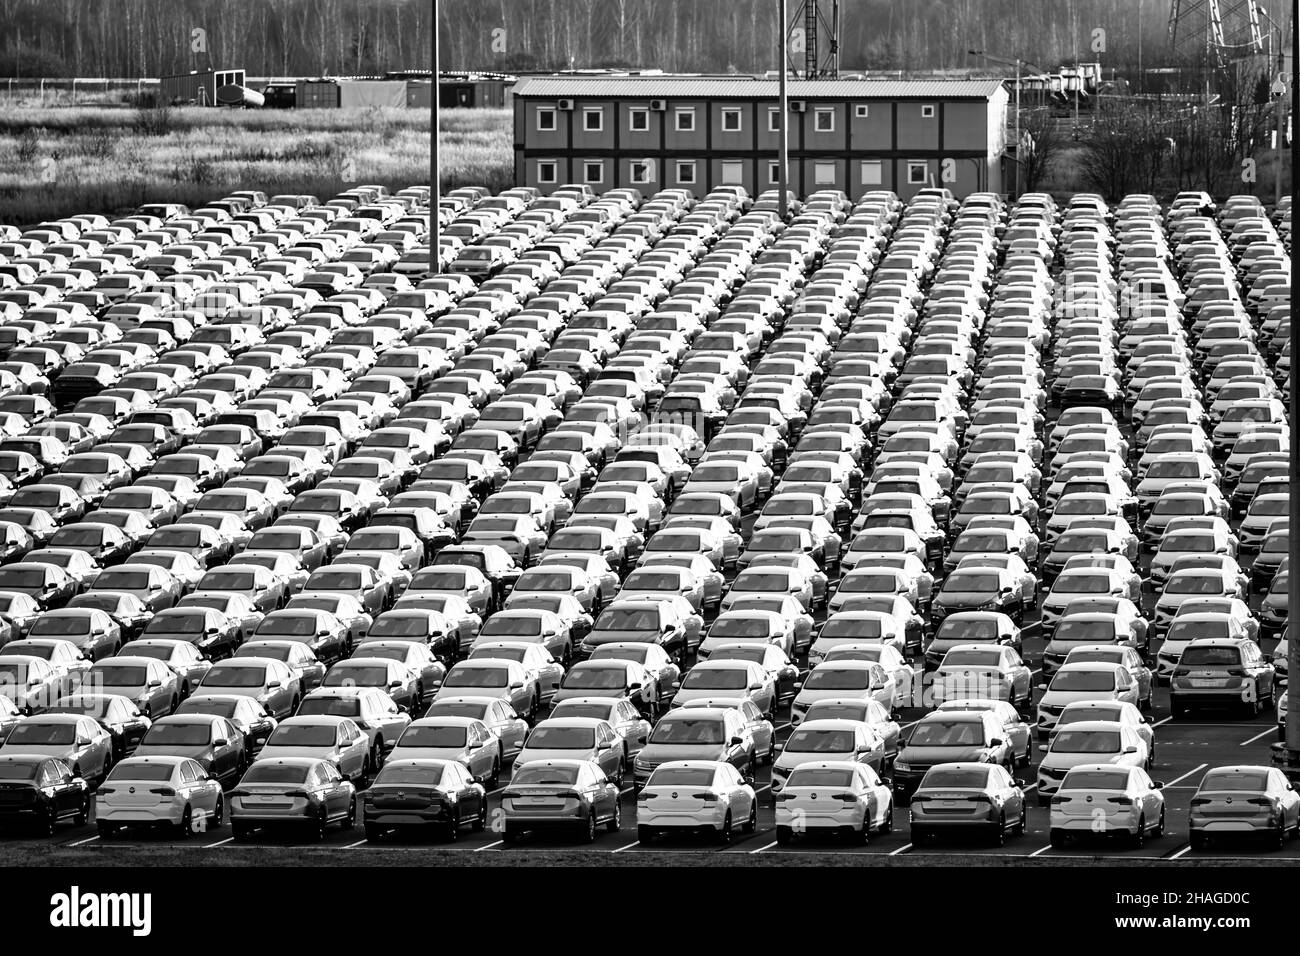 Volkswagen Group Rus, Russia, Kaluga - NOVEMBER 17, 2020: Rows of a new cars parked in a distribution center and a car factory buildings. Parking in t Stock Photo